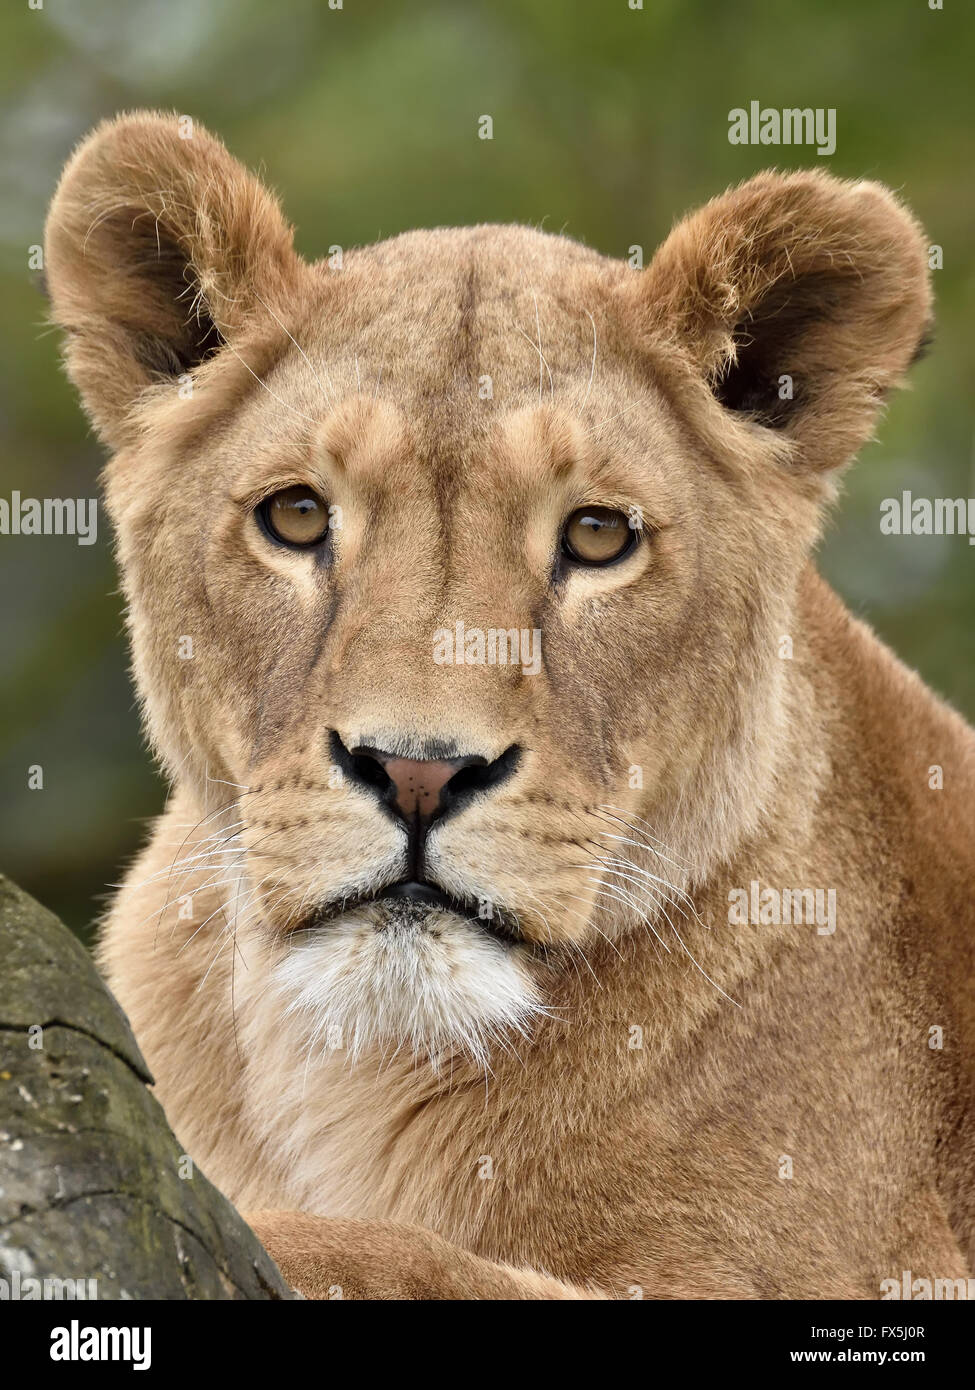 Closeup portrait of a lioness seen from the front Stock Photo